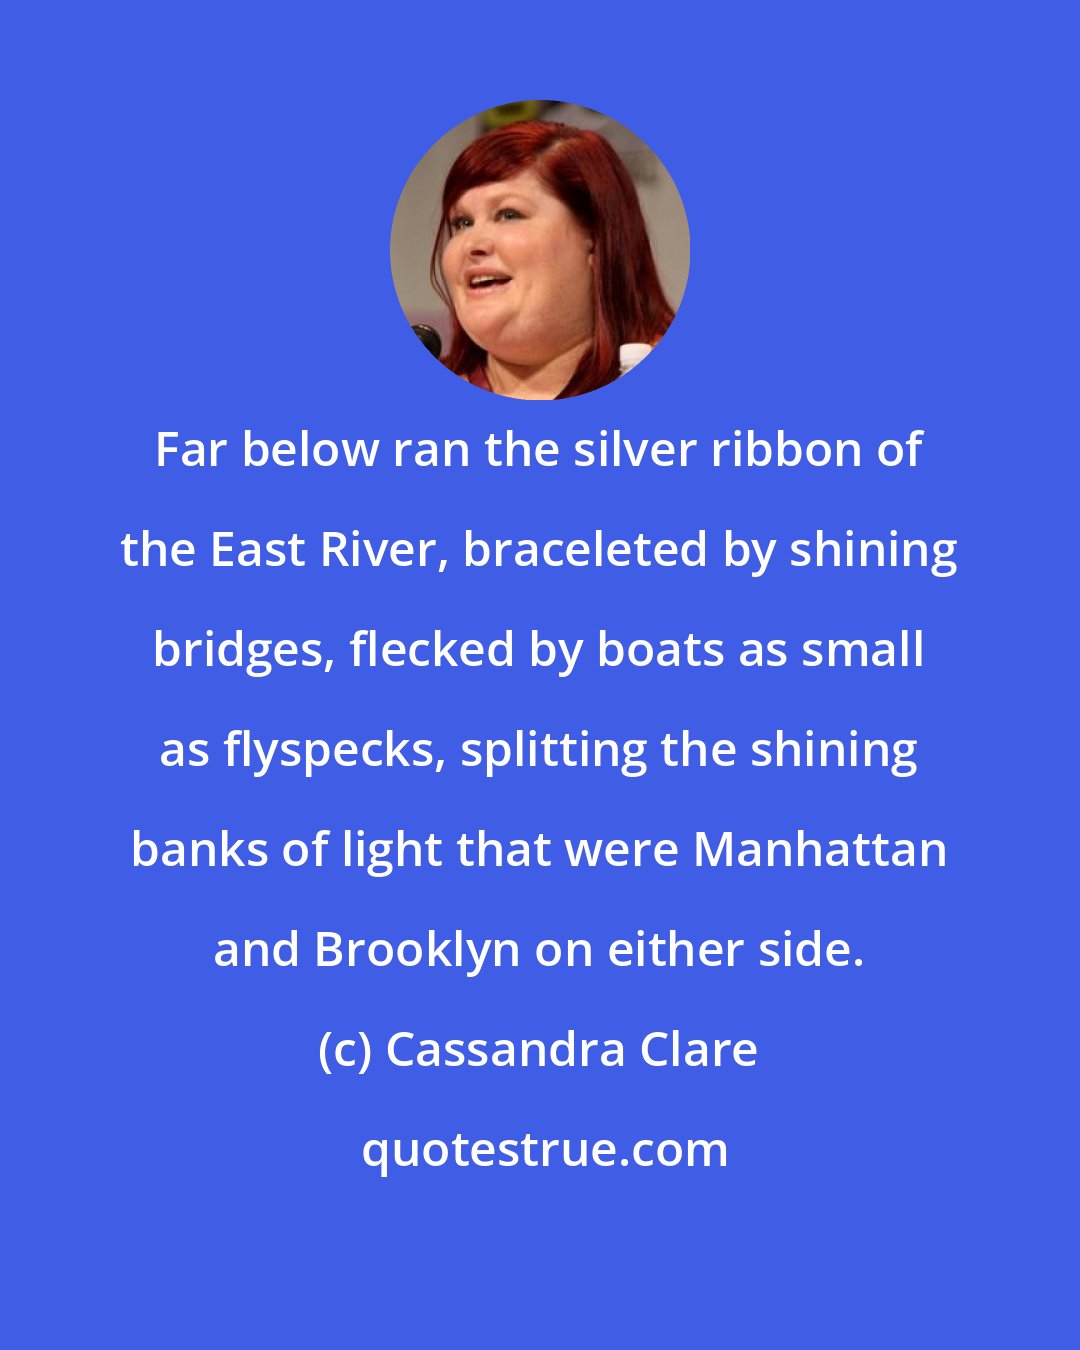 Cassandra Clare: Far below ran the silver ribbon of the East River, braceleted by shining bridges, flecked by boats as small as flyspecks, splitting the shining banks of light that were Manhattan and Brooklyn on either side.